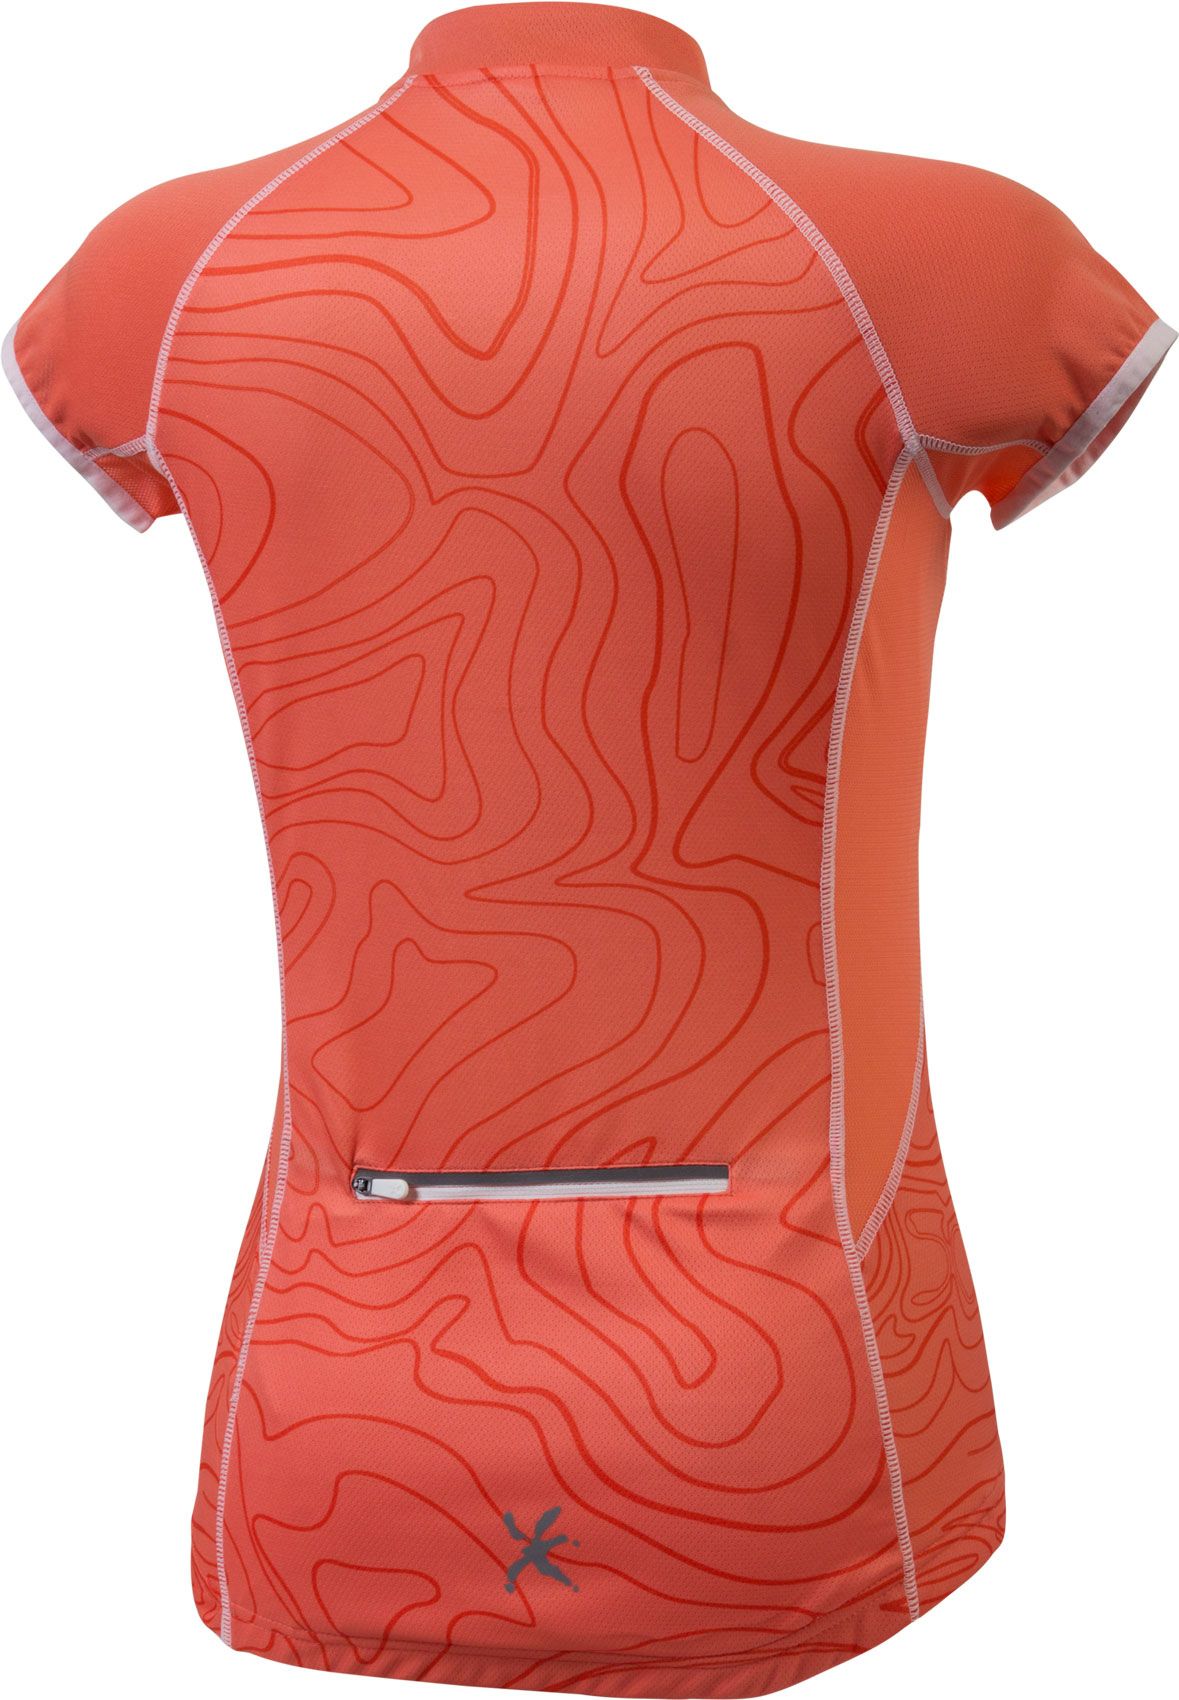 Women’s cycling jersey with a sublimation print